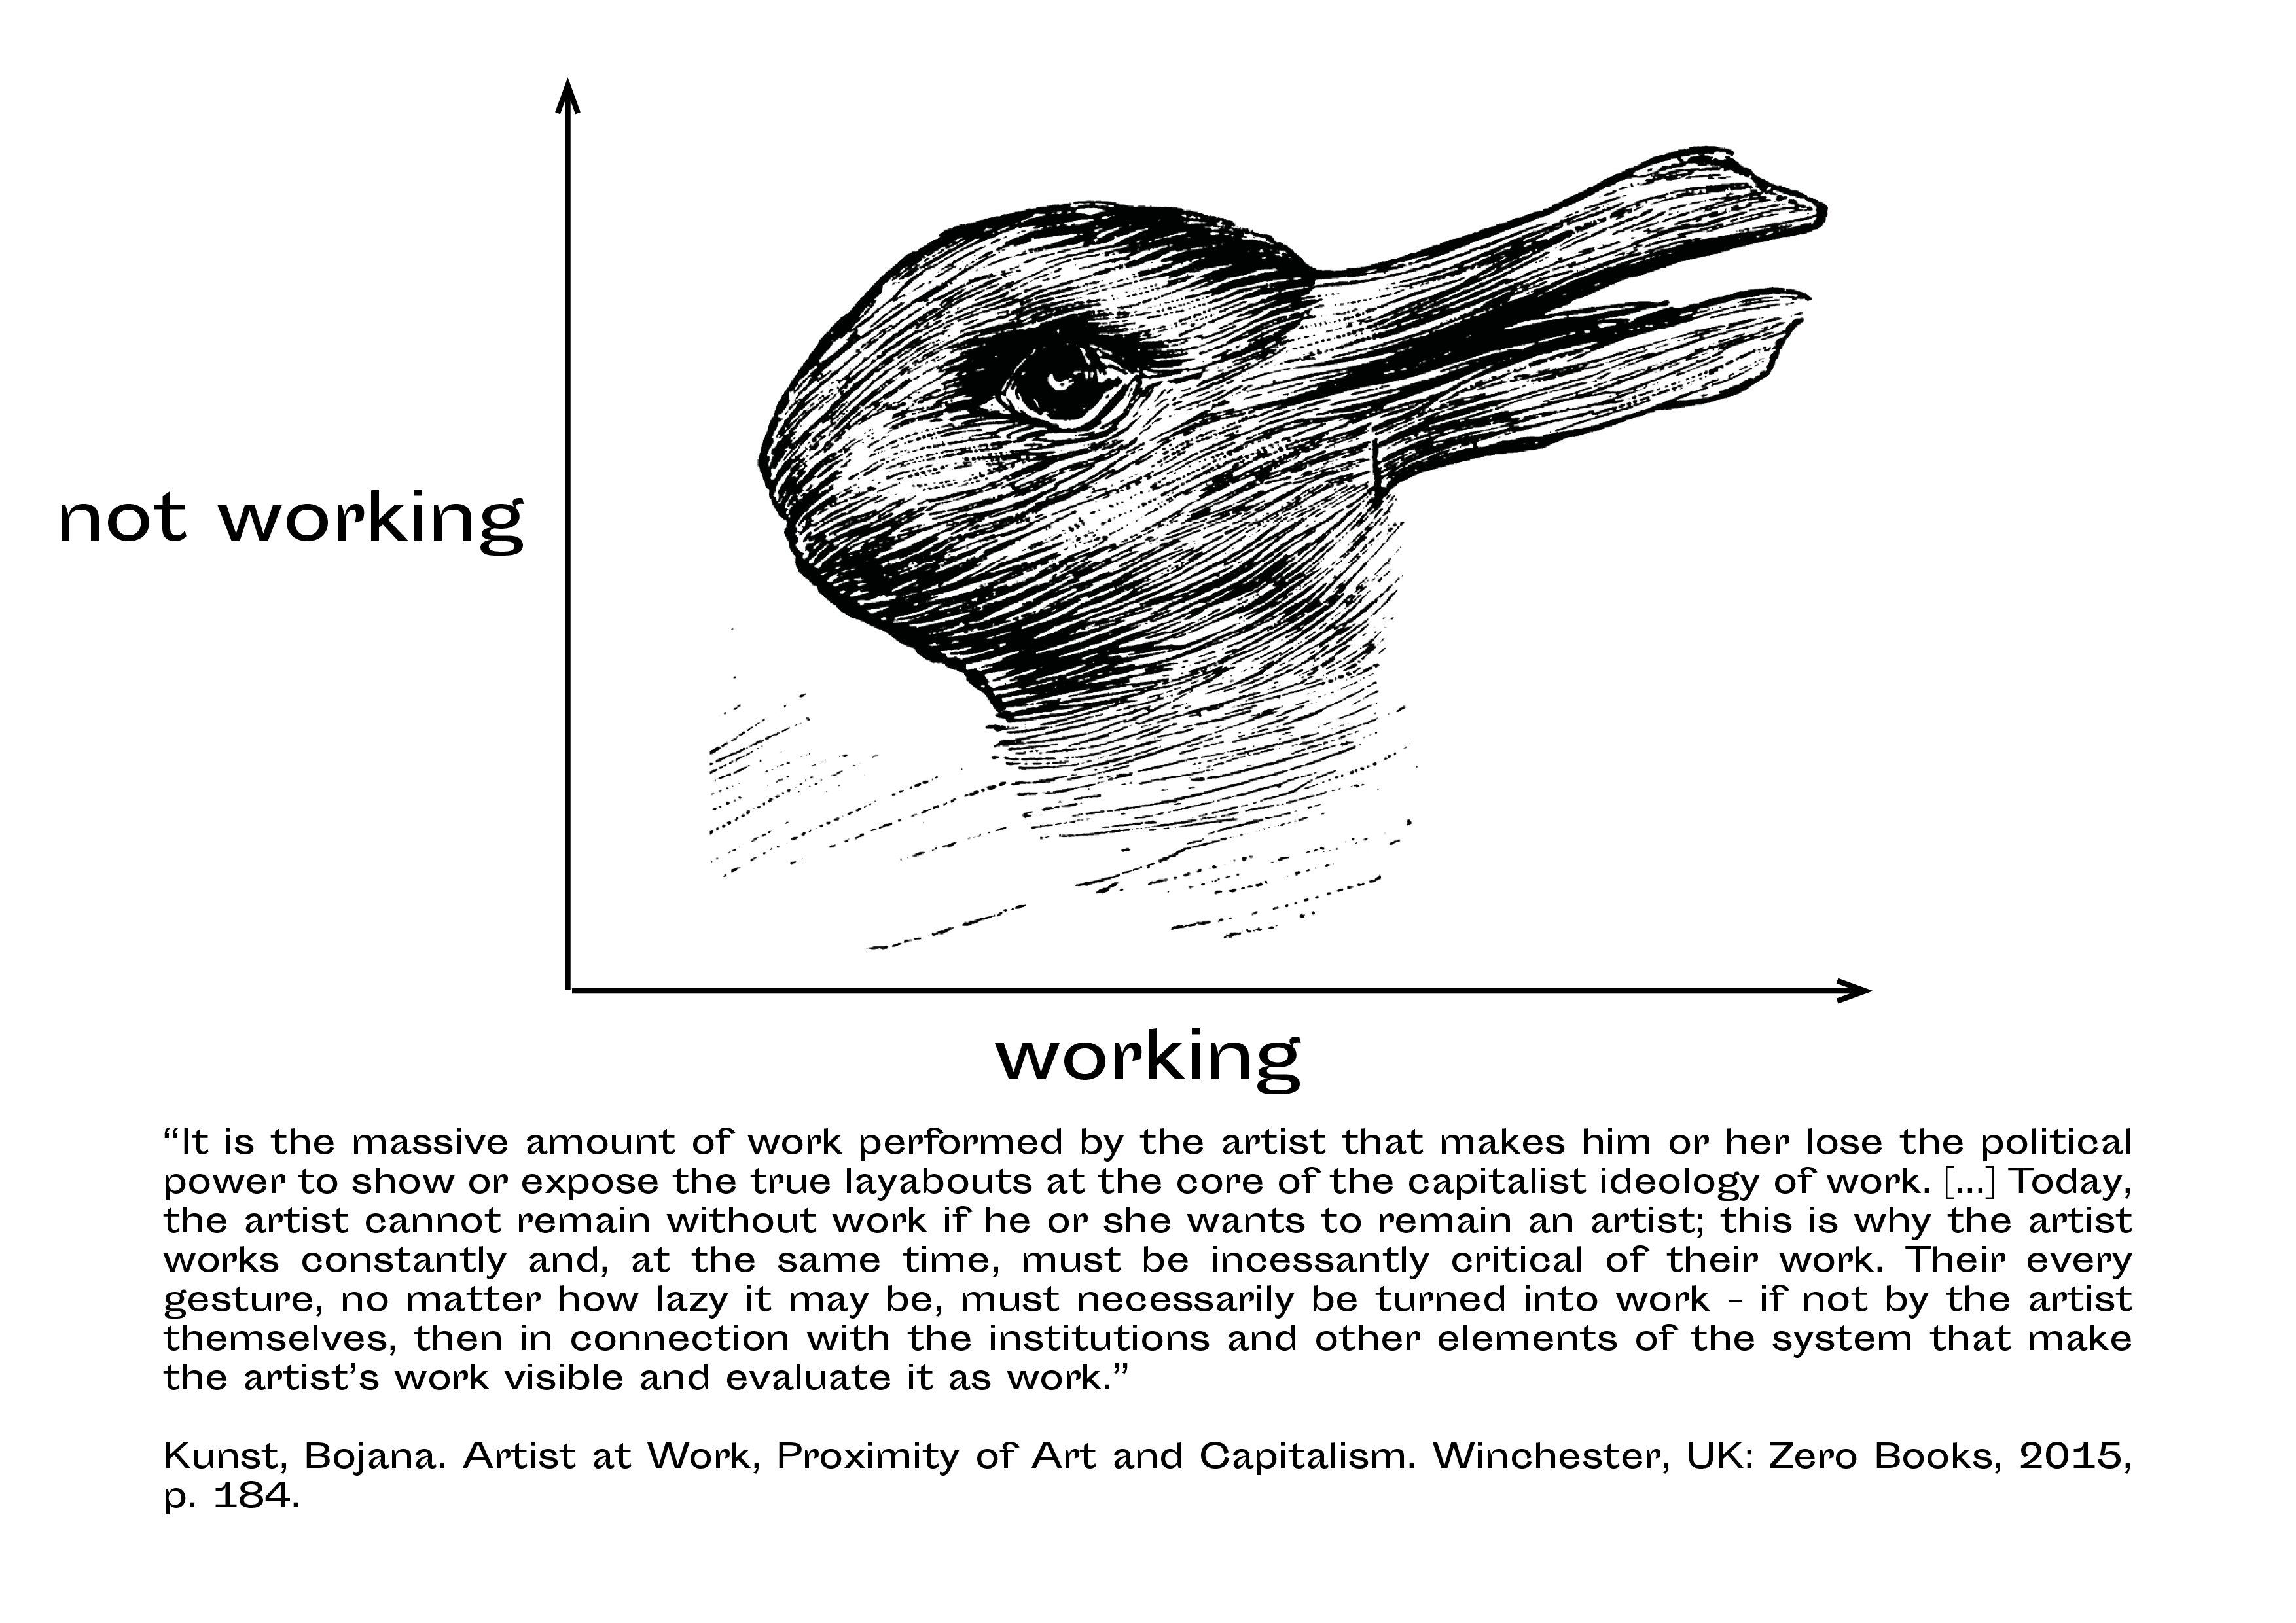 duckrabit-illusion-for-text-copythis-one-is-good-one5